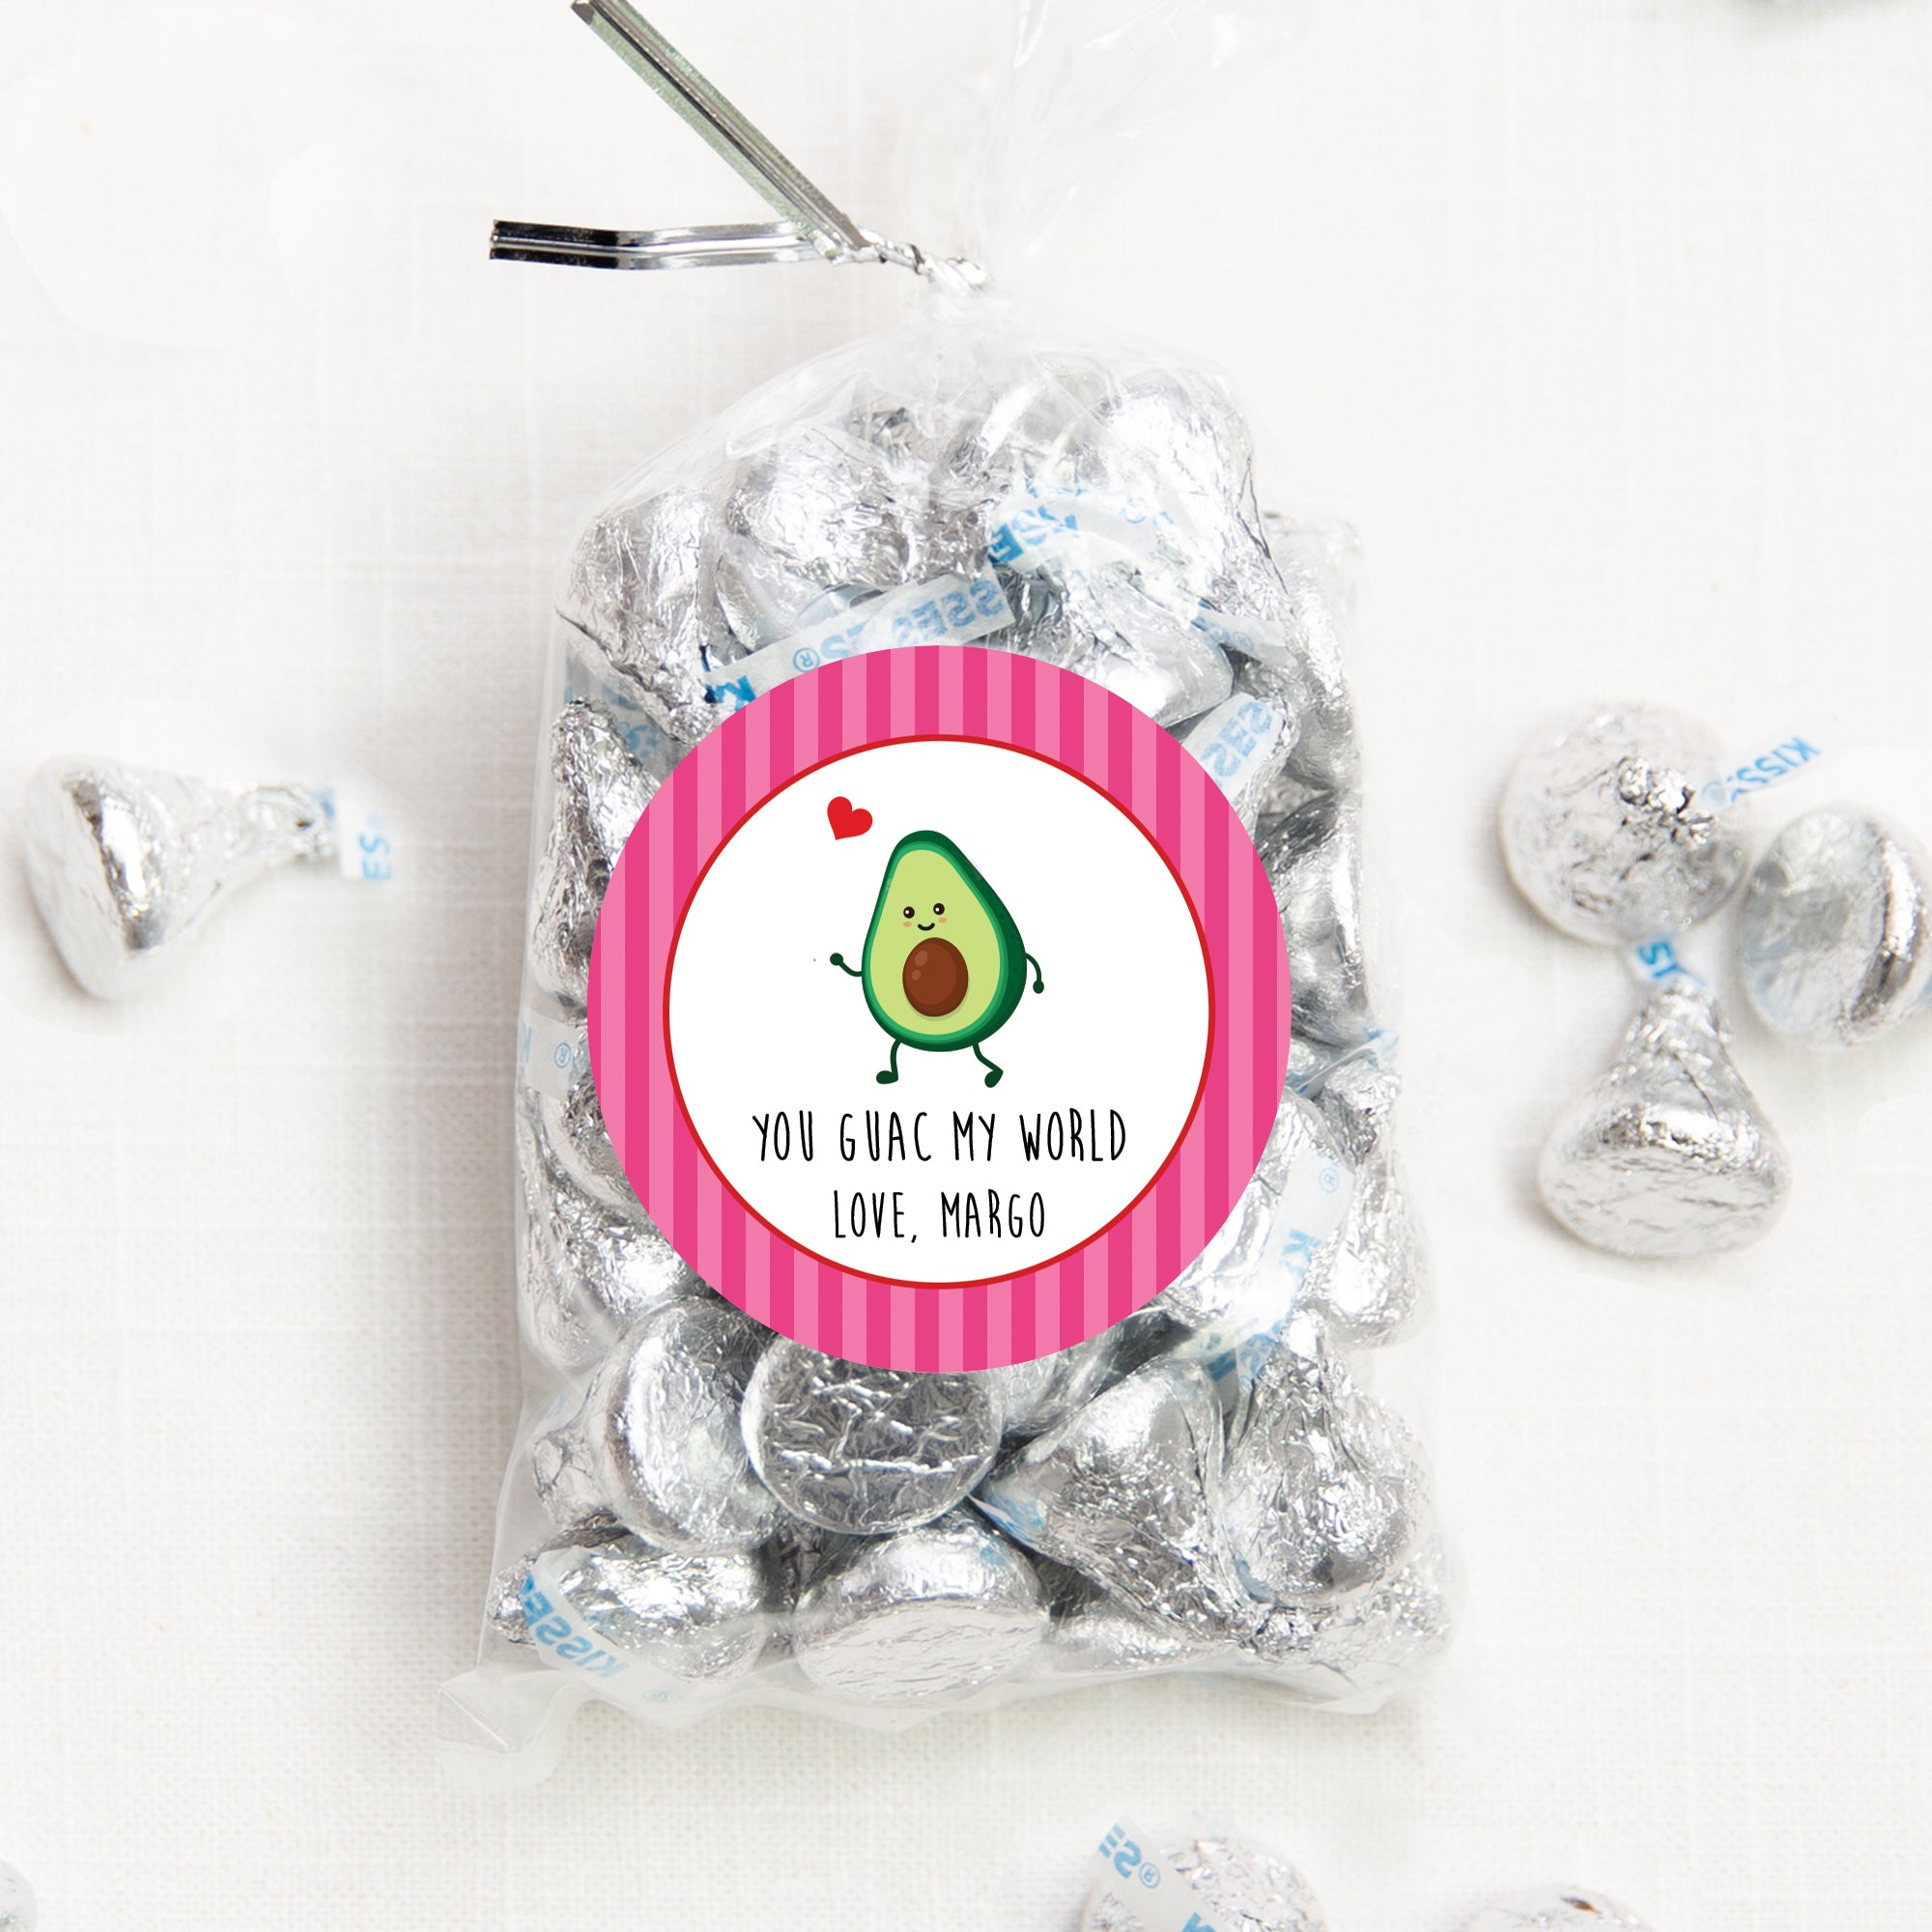 You guac my world Valentine | Class party stickers | 2.5" round with pink striped border |Pipsy.com